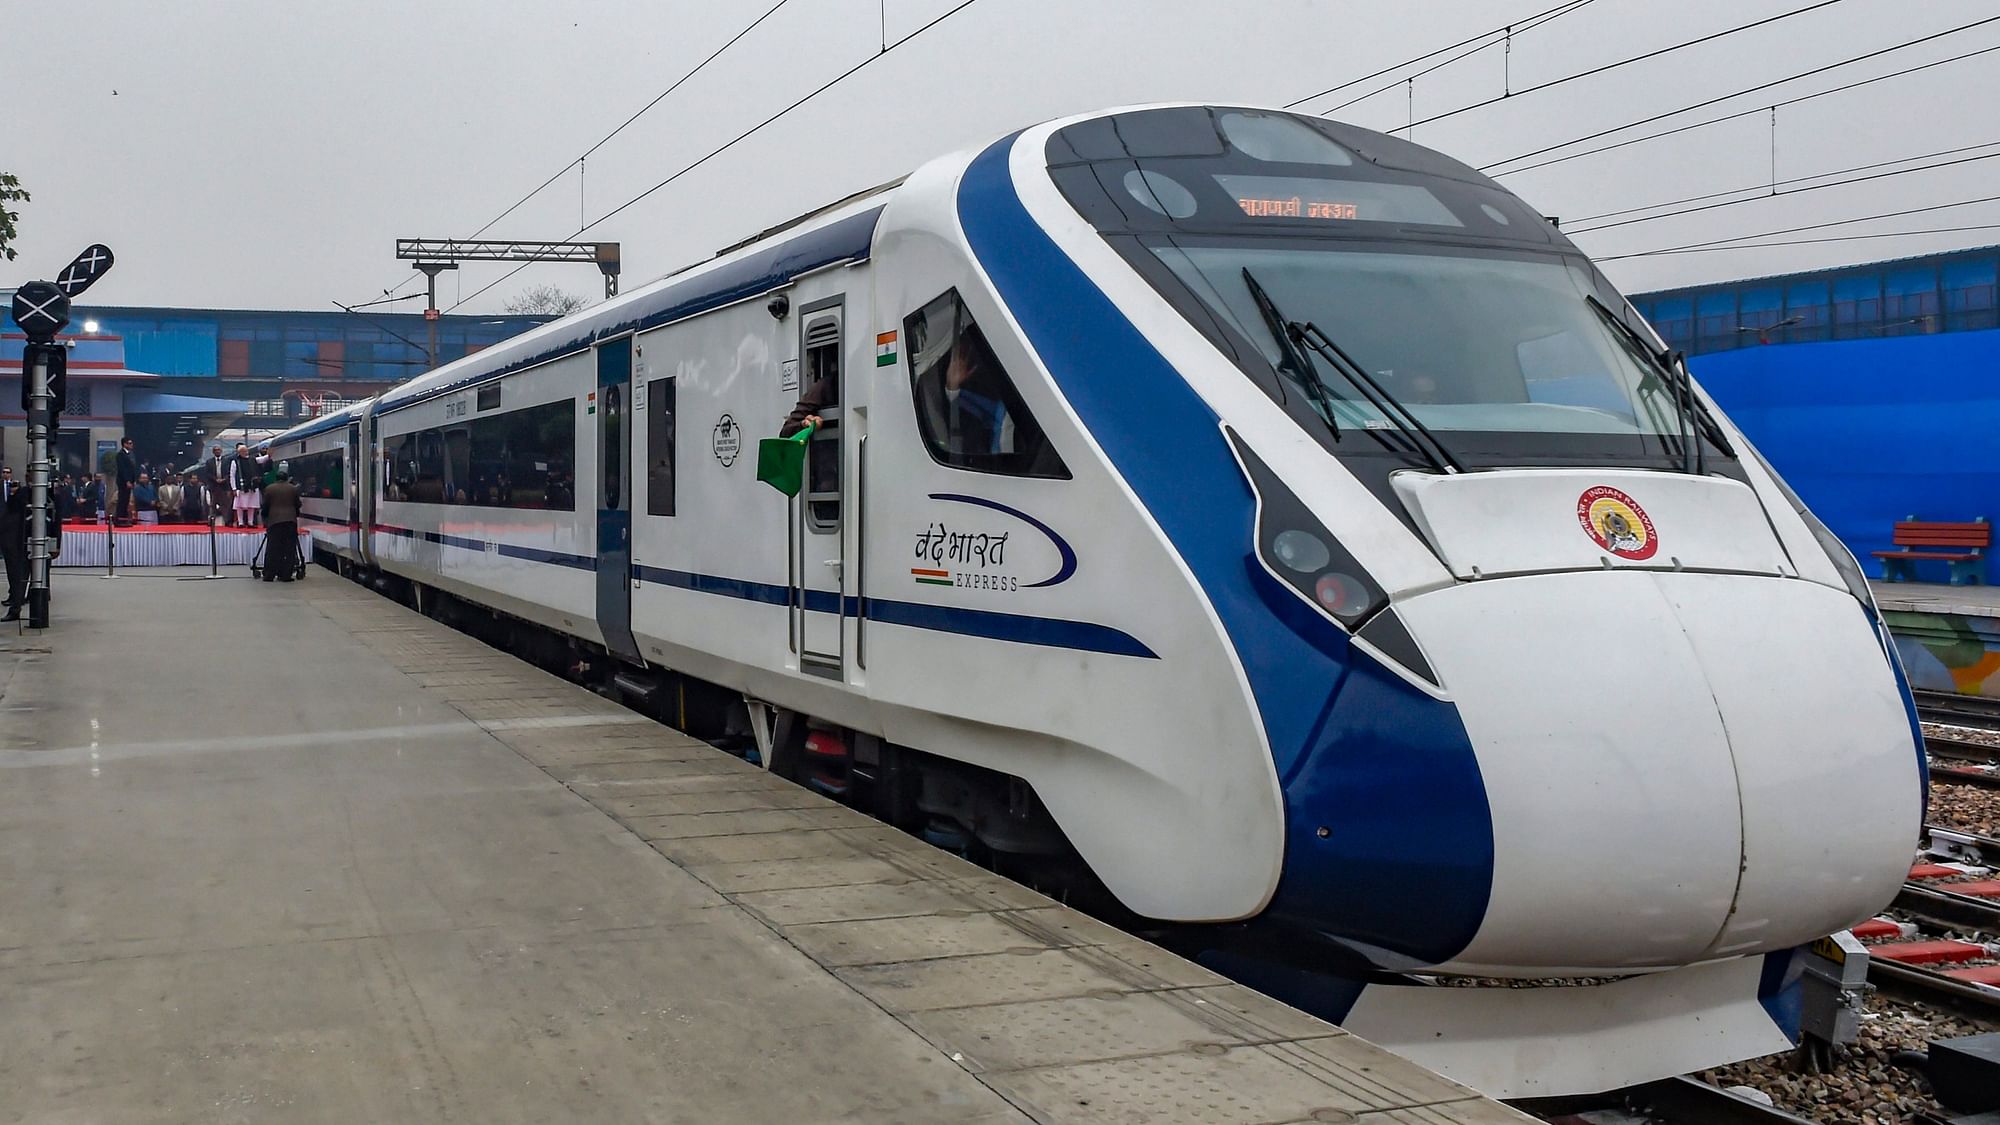 Vande Bhara, India’s fastest train was flagged off on Thursday, 3 October.